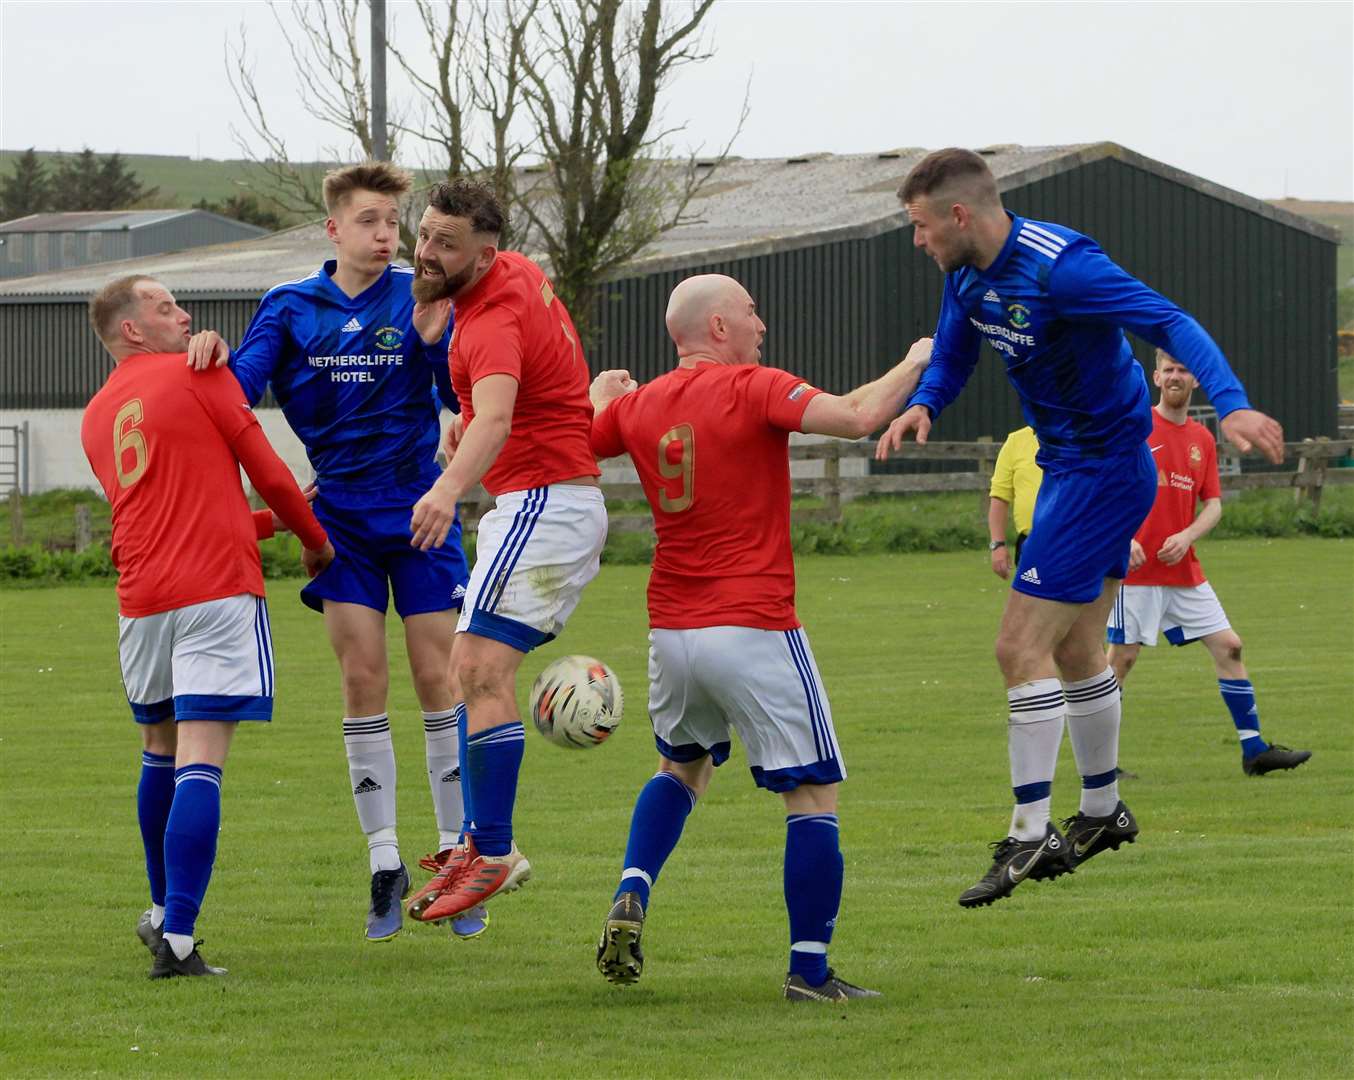 A scramble in the Lybster penalty area.